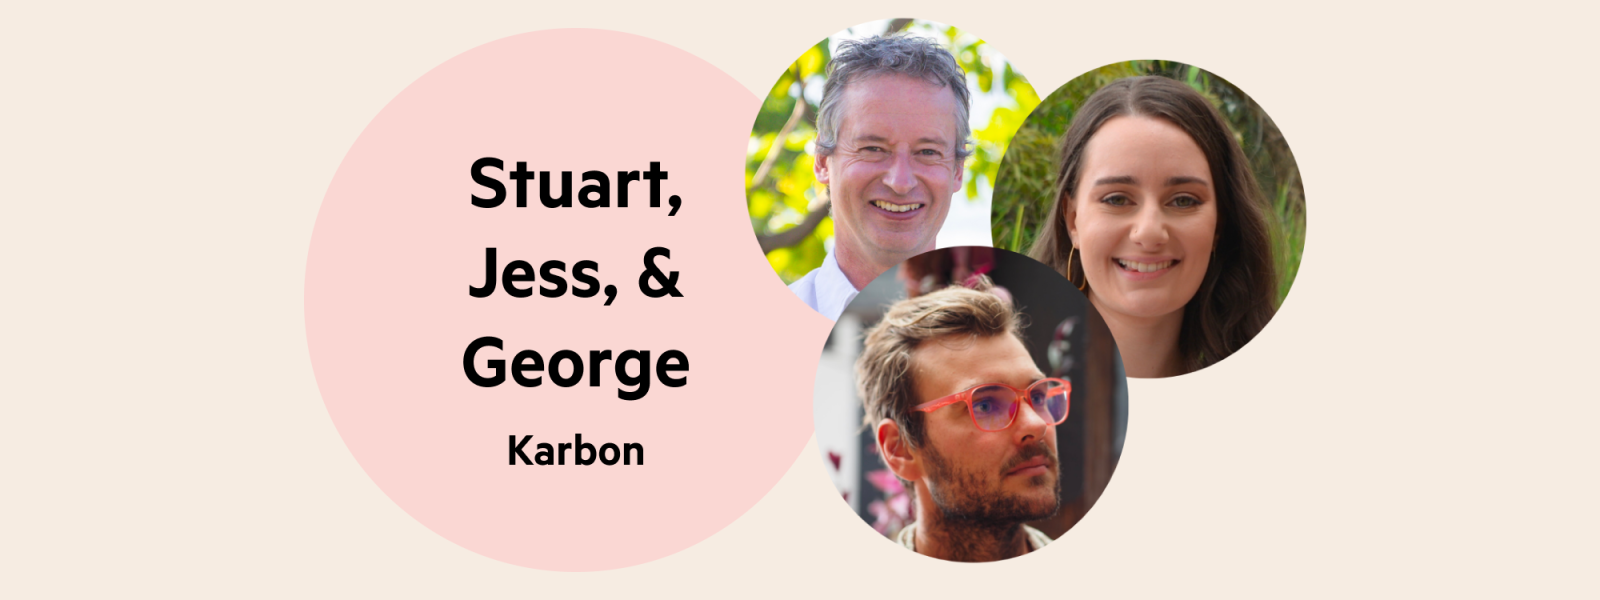 A pale pink circle with the words 'Stuart, Jess & George, Karbon', and a cluster of 3 headshots next to the circle. These are Stuart, Jess and George's headshots.